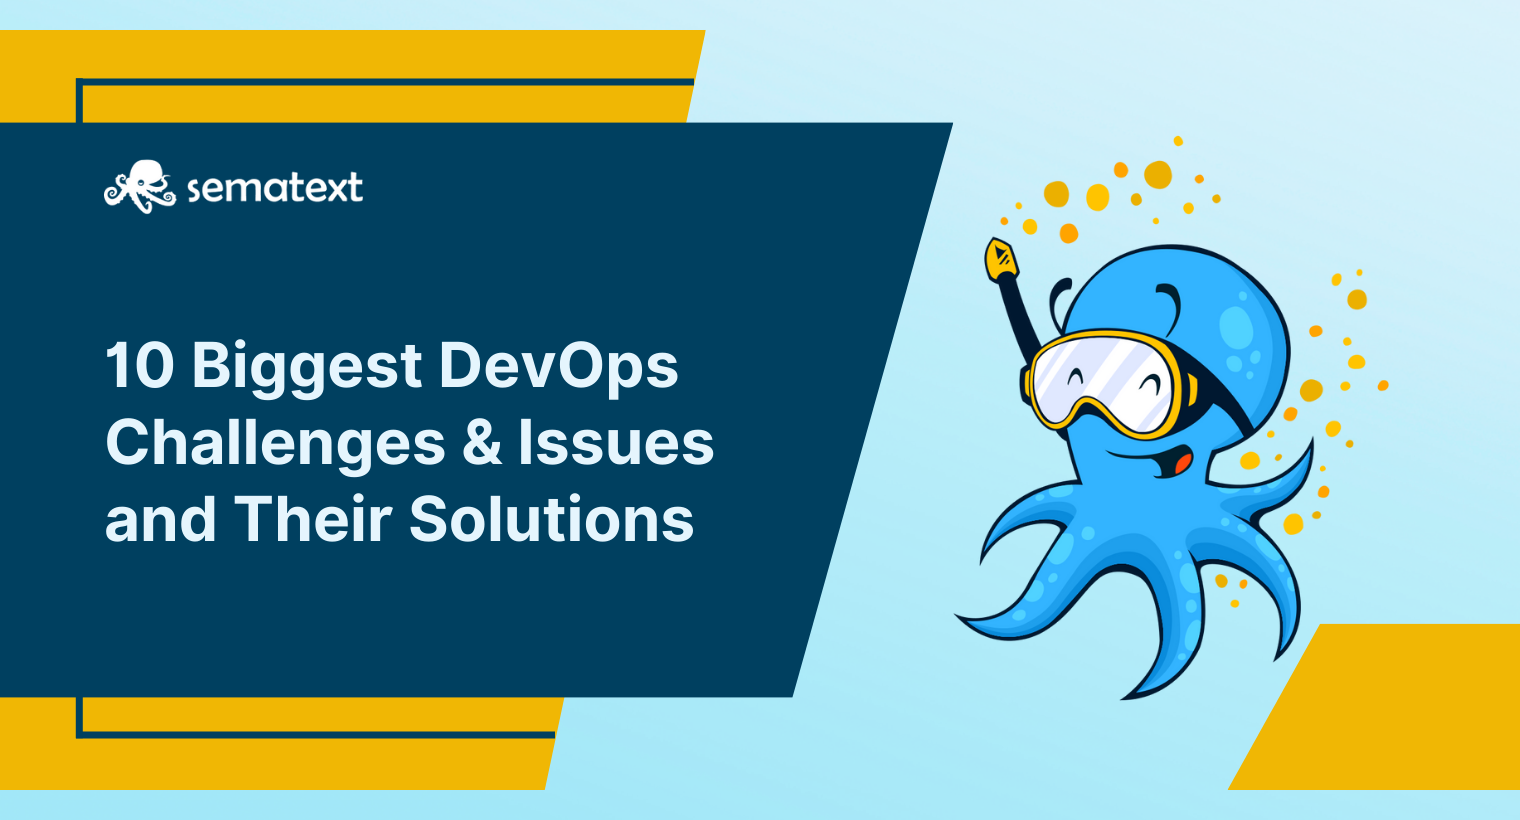 10 Major DevOps Challenges & Issues Teams Are Facing and Their Solutions